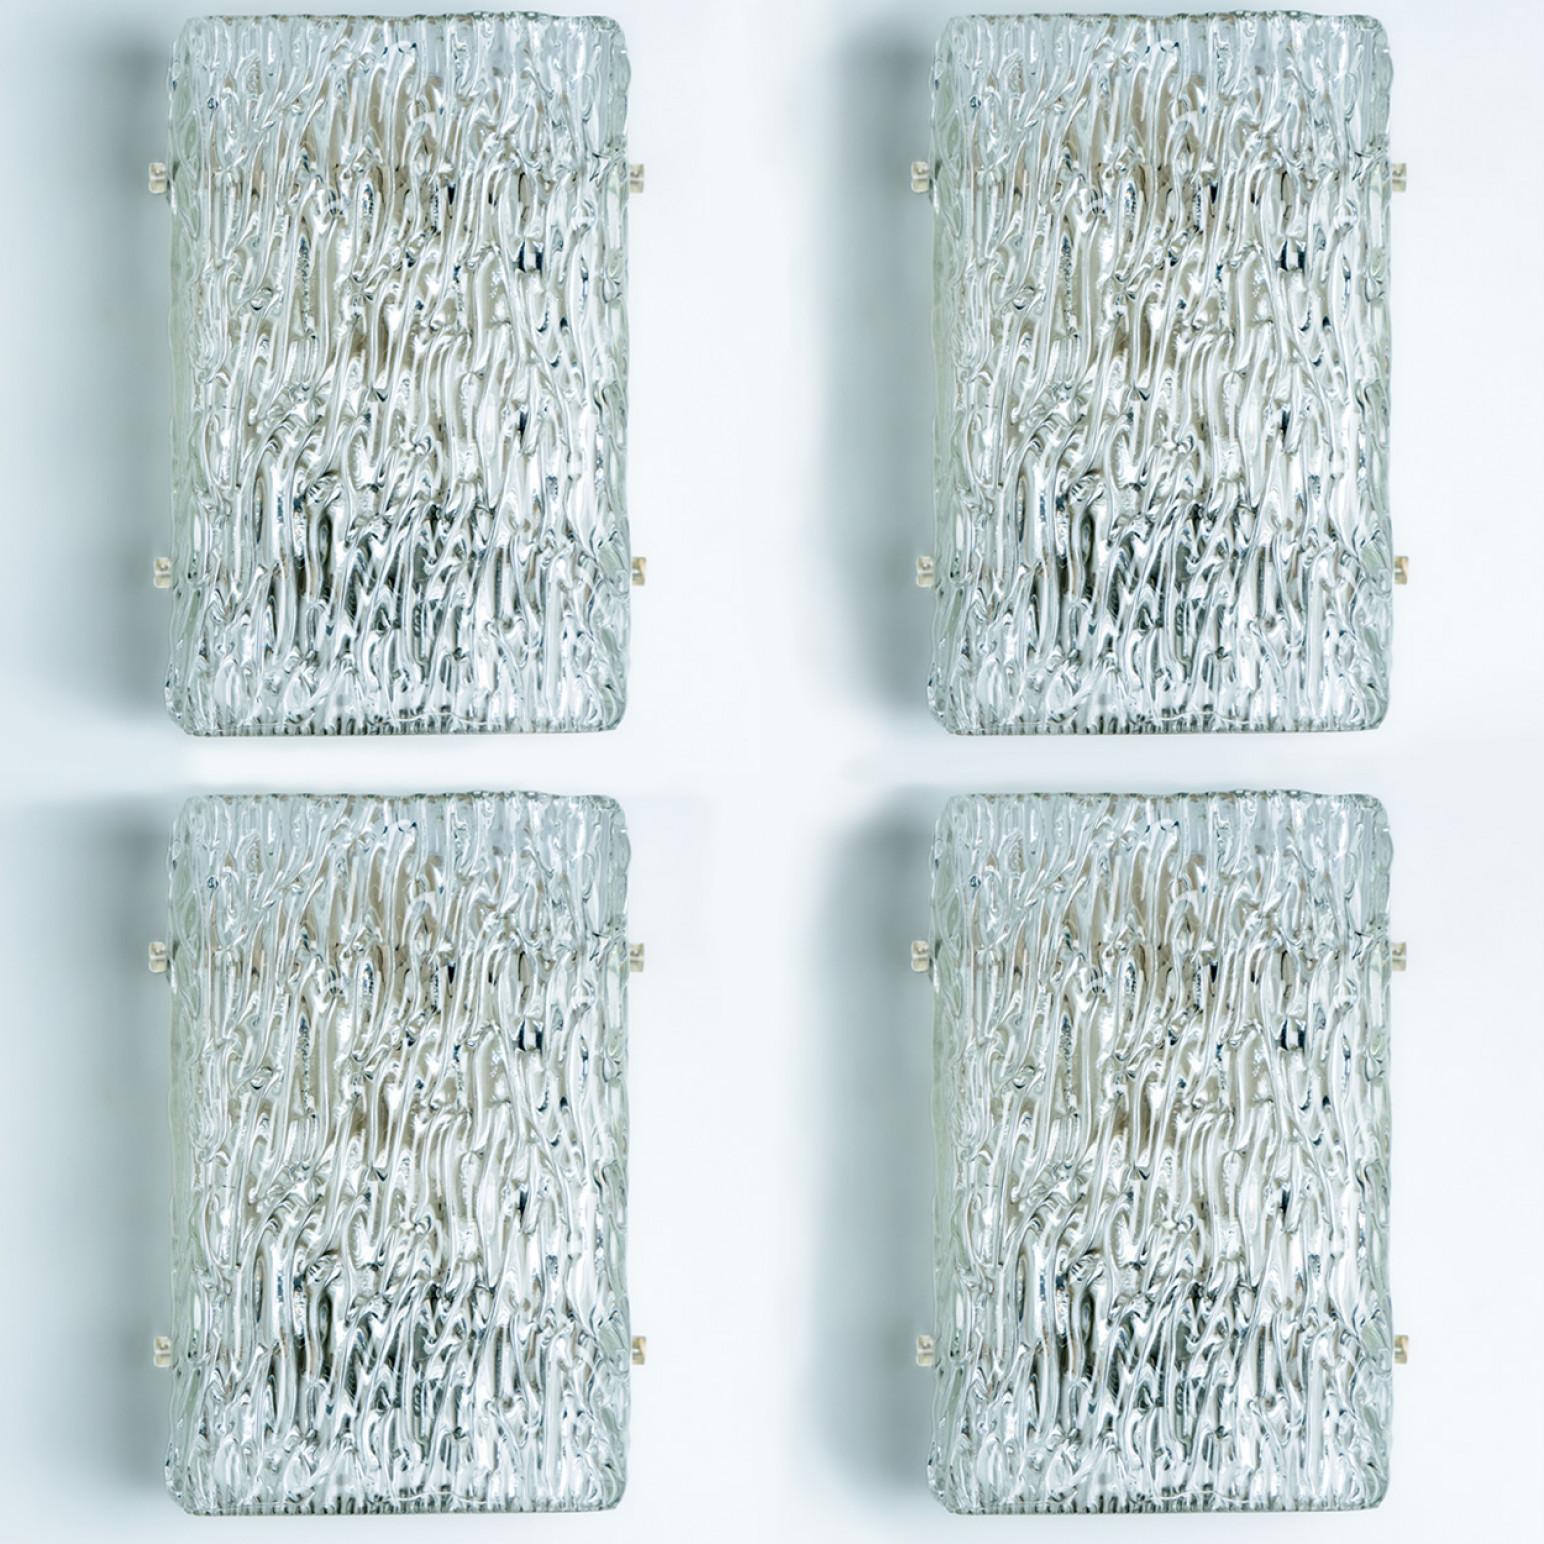 20th Century 1 of 4 Textured Wave Glass Wall Lights by Kalmar Leuchten, 1970s For Sale